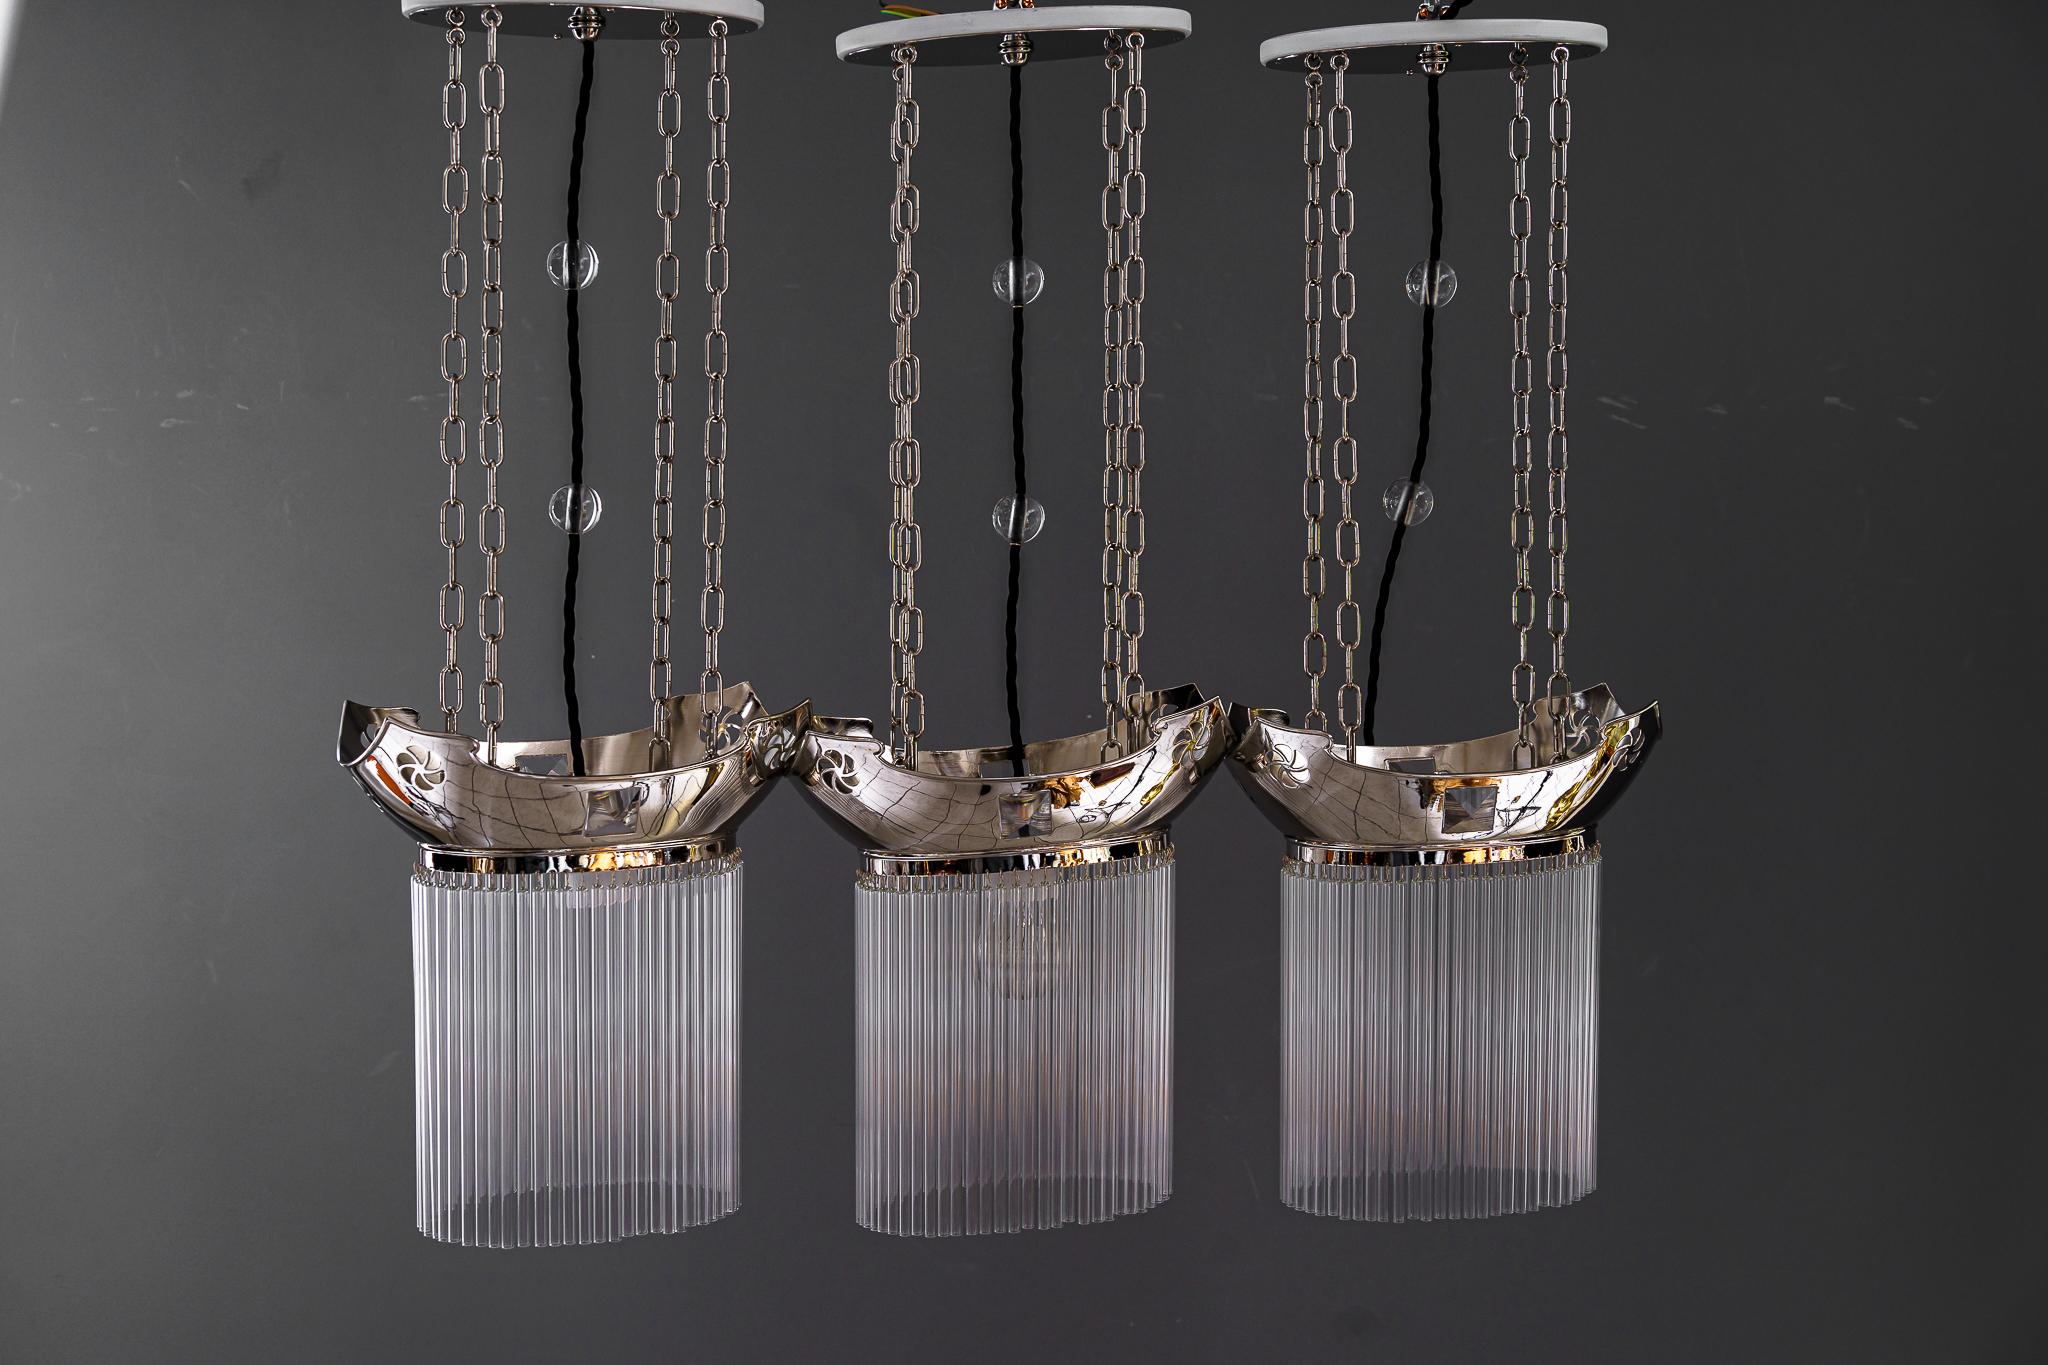 3x Art Deco nickel-plated Pendants with glass sticks, Vienna, around 1920s
The glass sticks are replaced (new)
The price is for together.